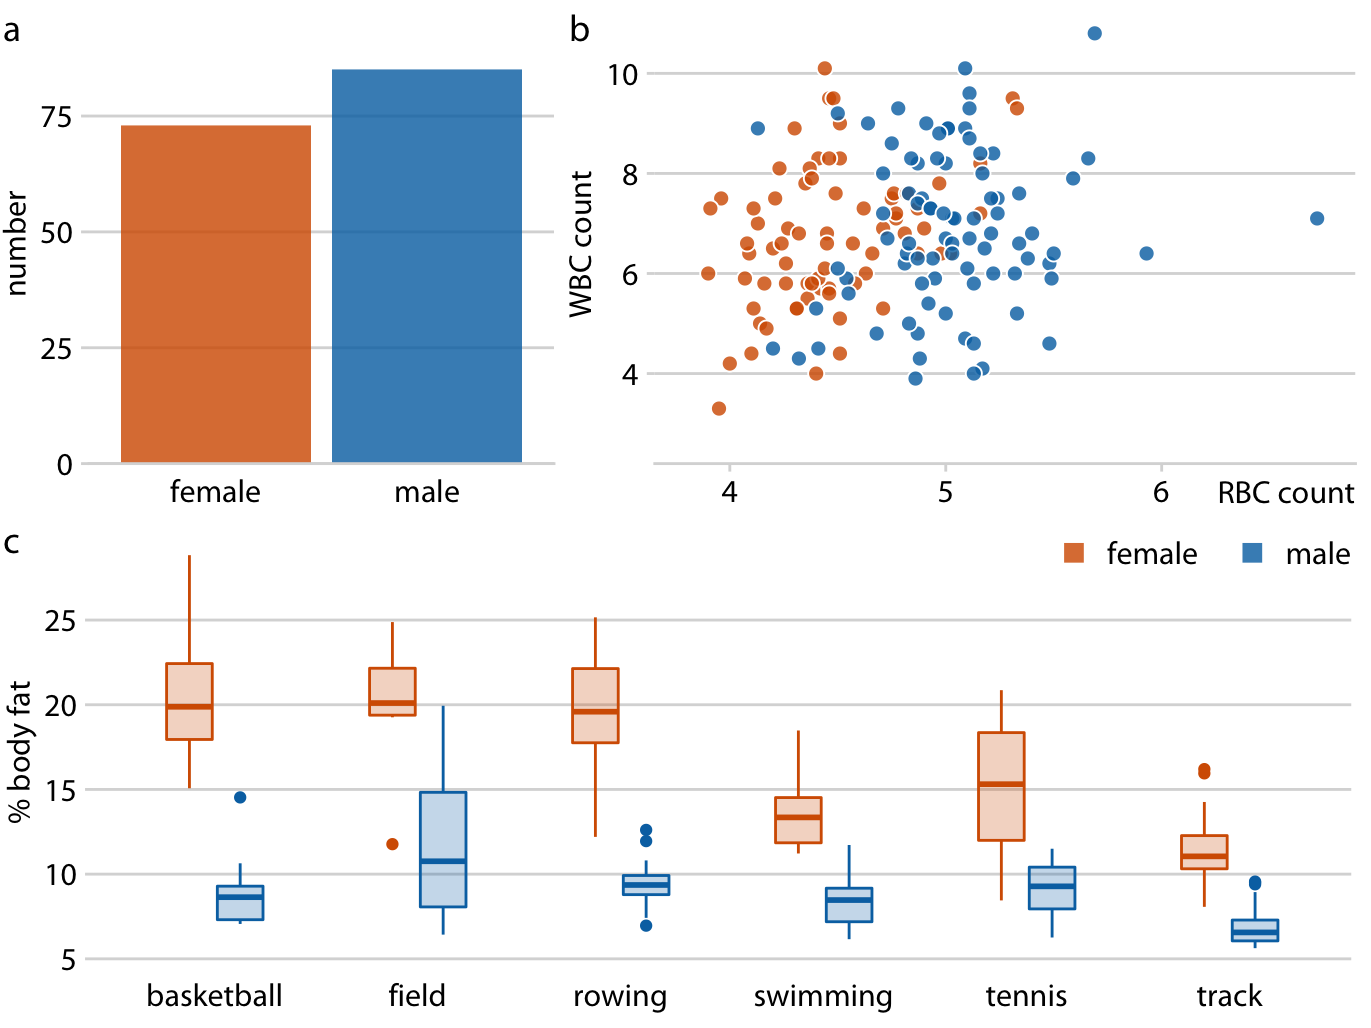 Physiology and body-composition of male and female athletes. This figure shows the exact same data as Figure 21.7, but now using a consistent visual language. Data for female athletes is always shown to the left of the corresponding data for male athletes, and genders are consistently color-coded throughout all elements of the figure. Data source: Telford and Cunningham (1991)